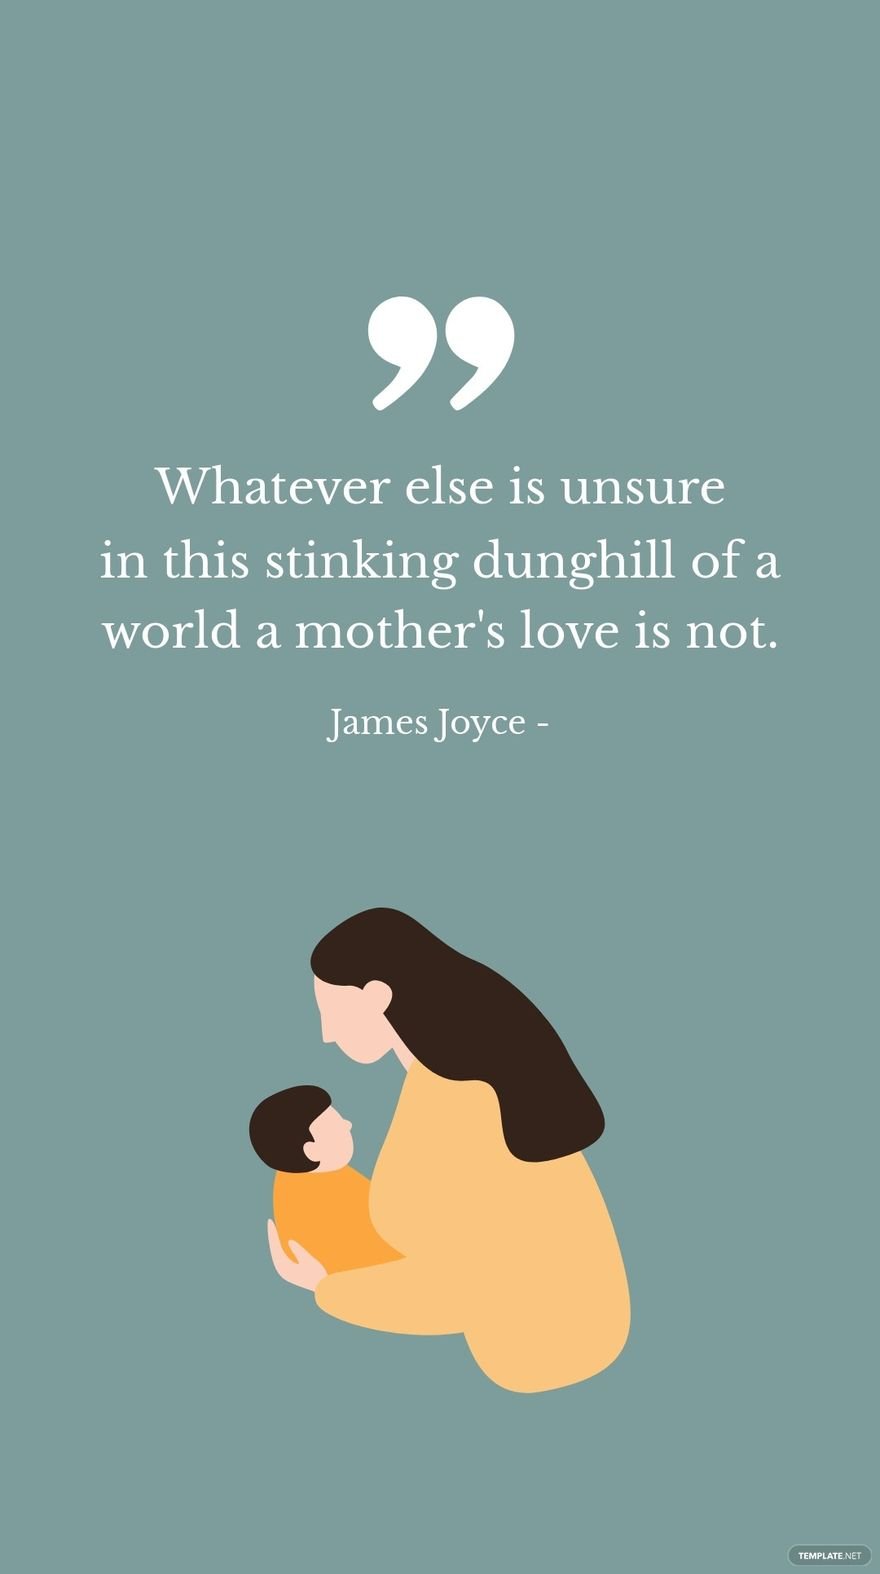 James Joyce - Whatever else is unsure in this stinking dunghill of a world a mother's love is not.